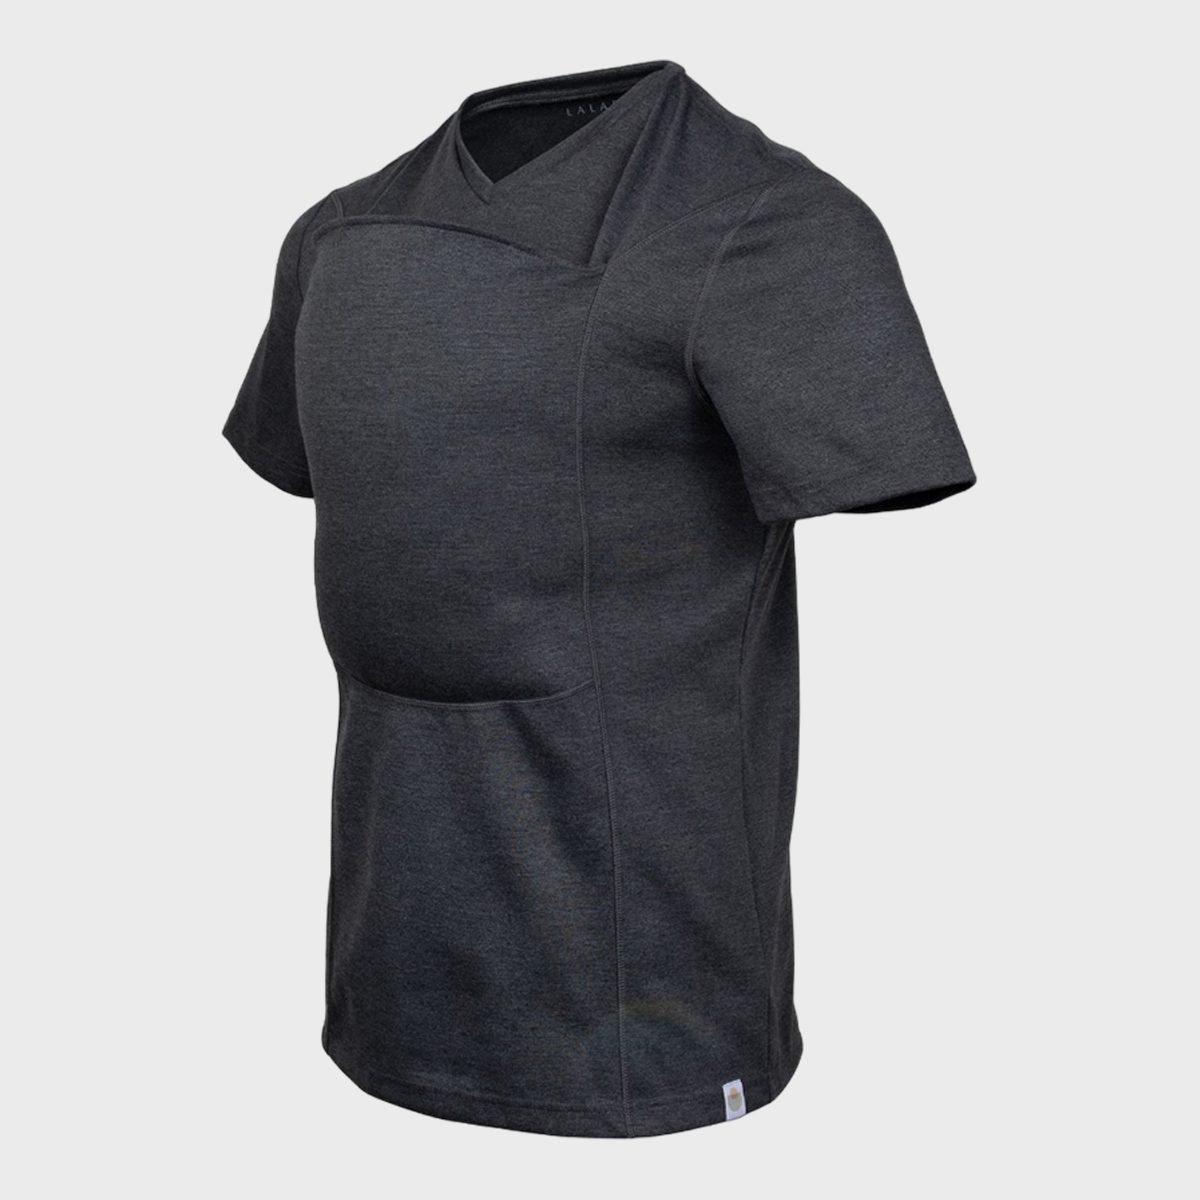 <p>This <a href="https://shop.lalabu.com/collections/dad-shirt" rel="noopener noreferrer">cozy shirt</a> was designed just for dads and couldn't be simpler to use. All he has to do is throw on his shirt and tuck the baby into the front pouch. No complicated wrapping, strapping or buckling.</p> <p>This shirt is available in sizes small all the way up to 2XL and holds babies up to 15 pounds. Pair it with the brand's <a href="https://shop.lalabu.com/collections/simple-wrap" rel="noopener noreferrer">simple wrap</a> for mom to make the perfect his and hers gift. The stretchy wrap is cozy, easy to slip on, and is worn with baby facing in or out.</p> <p class="listicle-page__cta-button-shop"><a class="shop-btn" href="https://shop.lalabu.com/collections/dad-shirt">Shop Now</a></p>